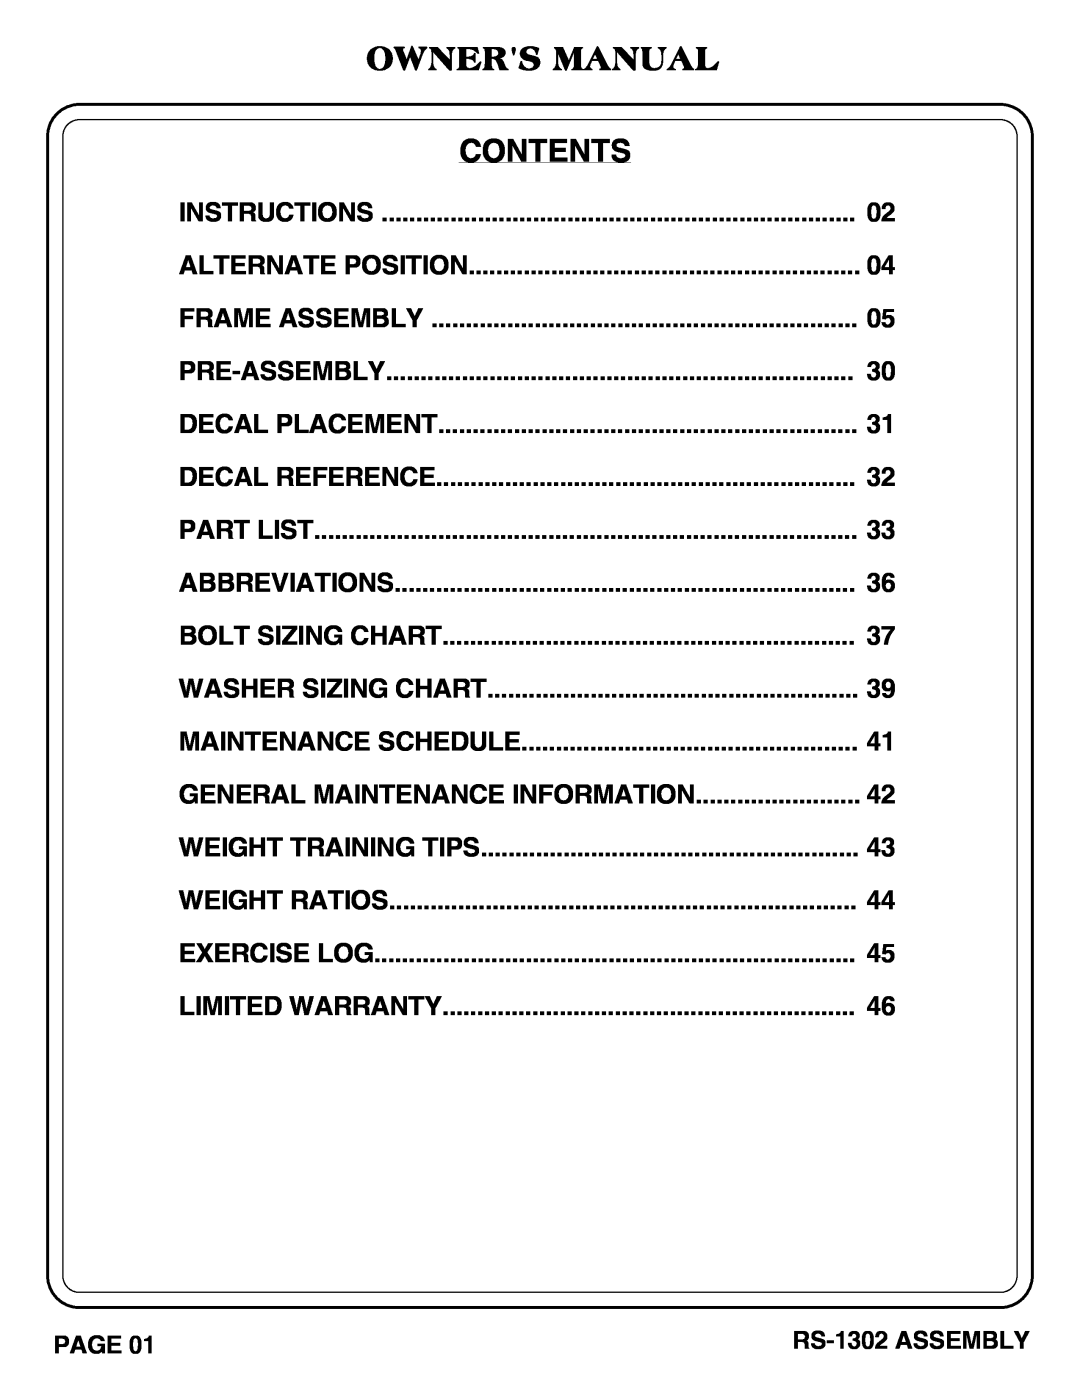 Hoist Fitness RS-1302 owner manual Owners Manual, Contents 